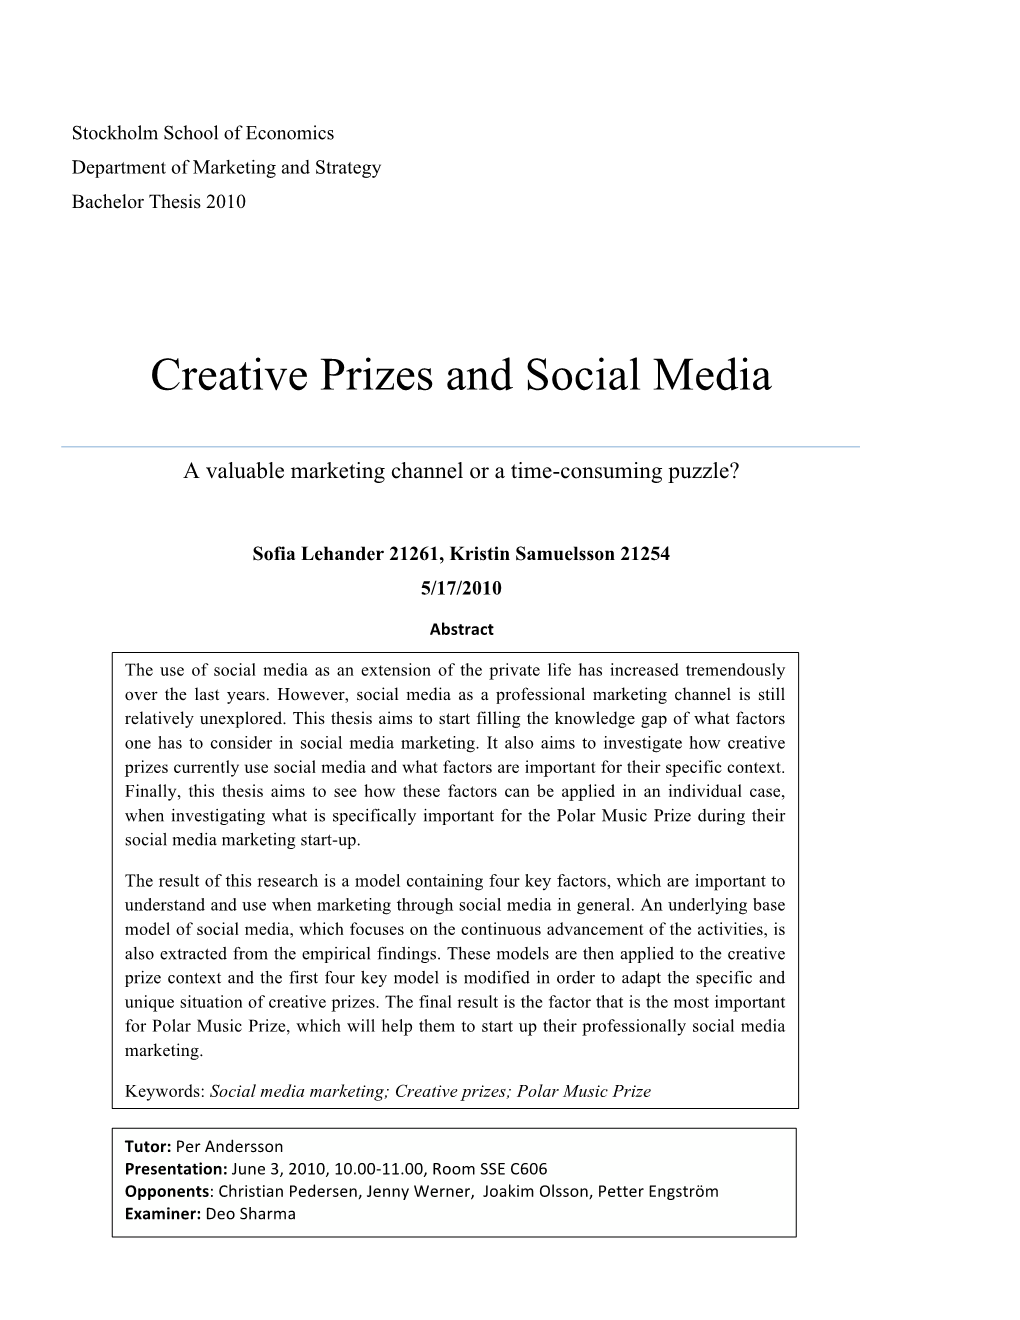 Creative Prizes and Social Media